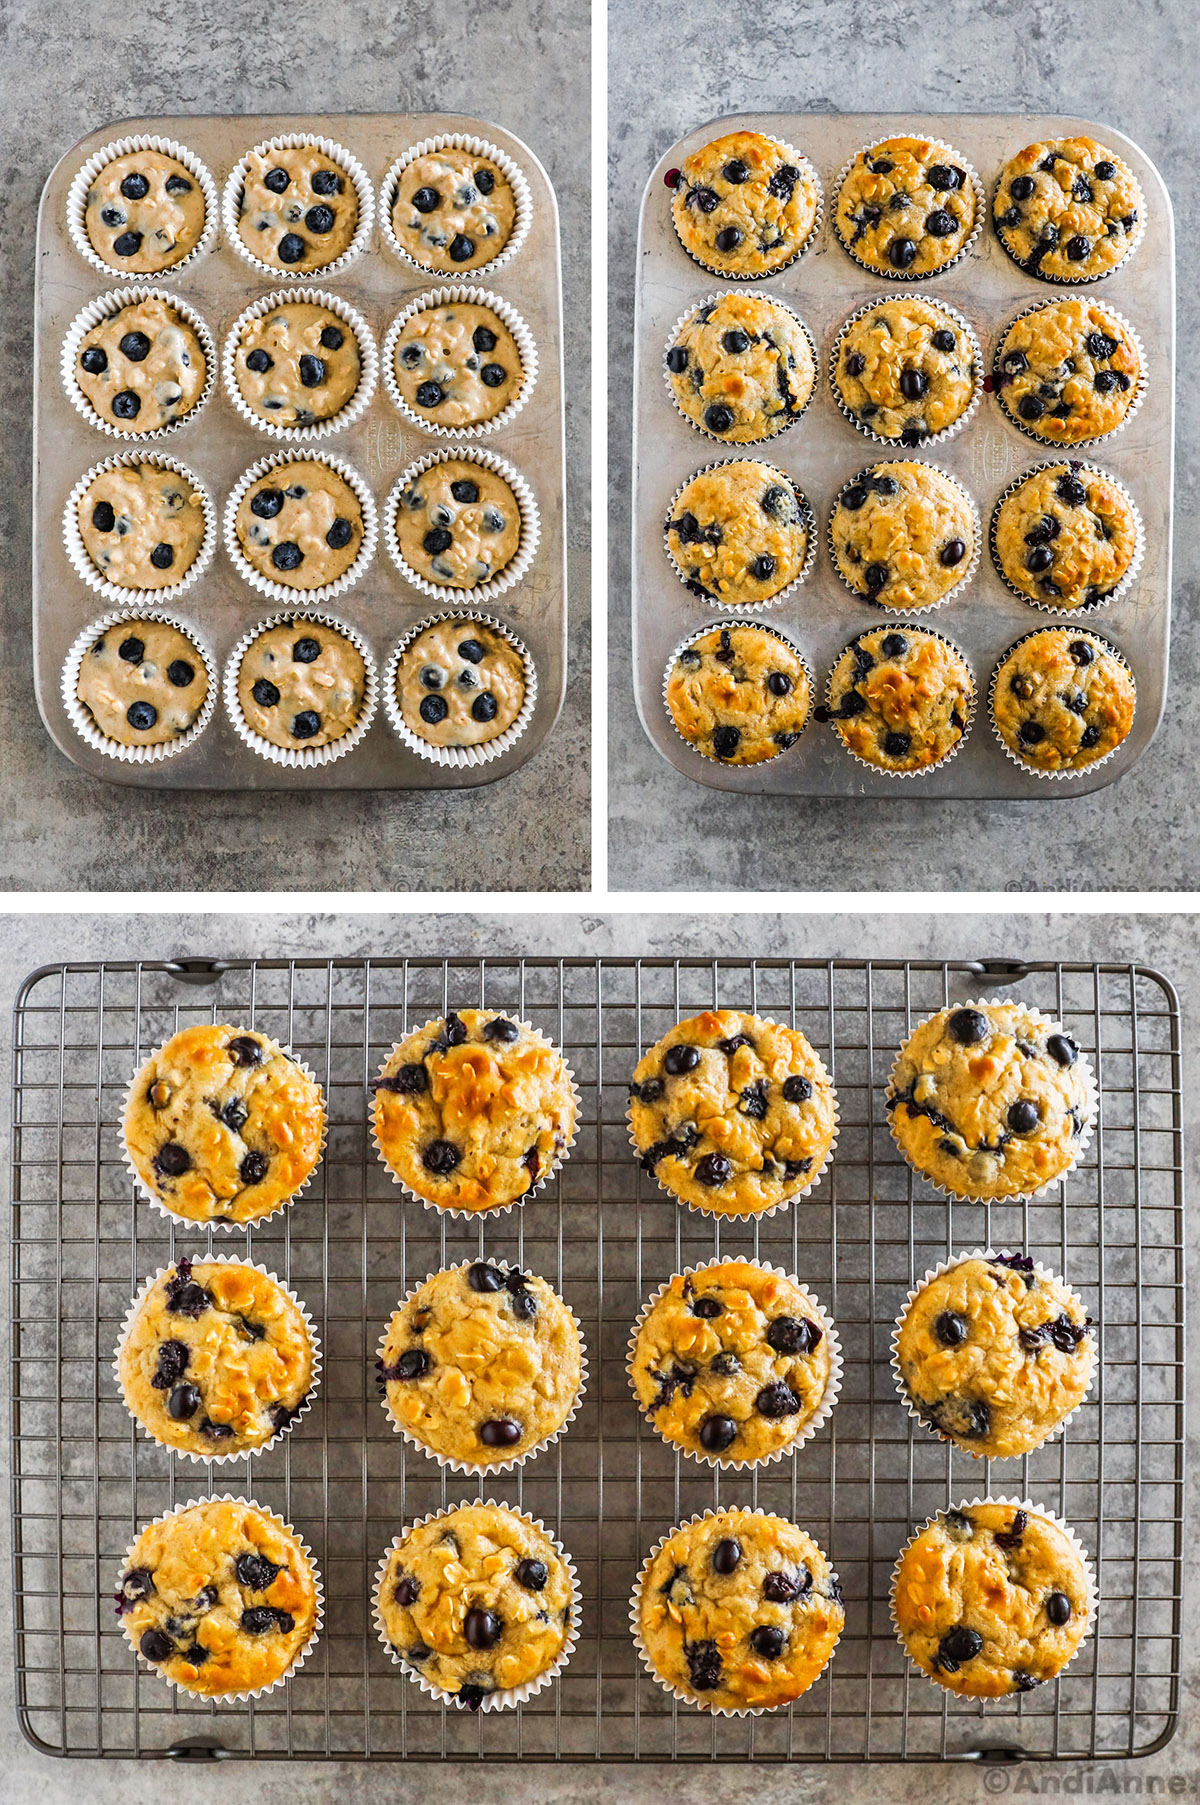 Three images of blueberry muffins, in muffin pan unbaked, baked in muffin pan, and baked on cooling rack.